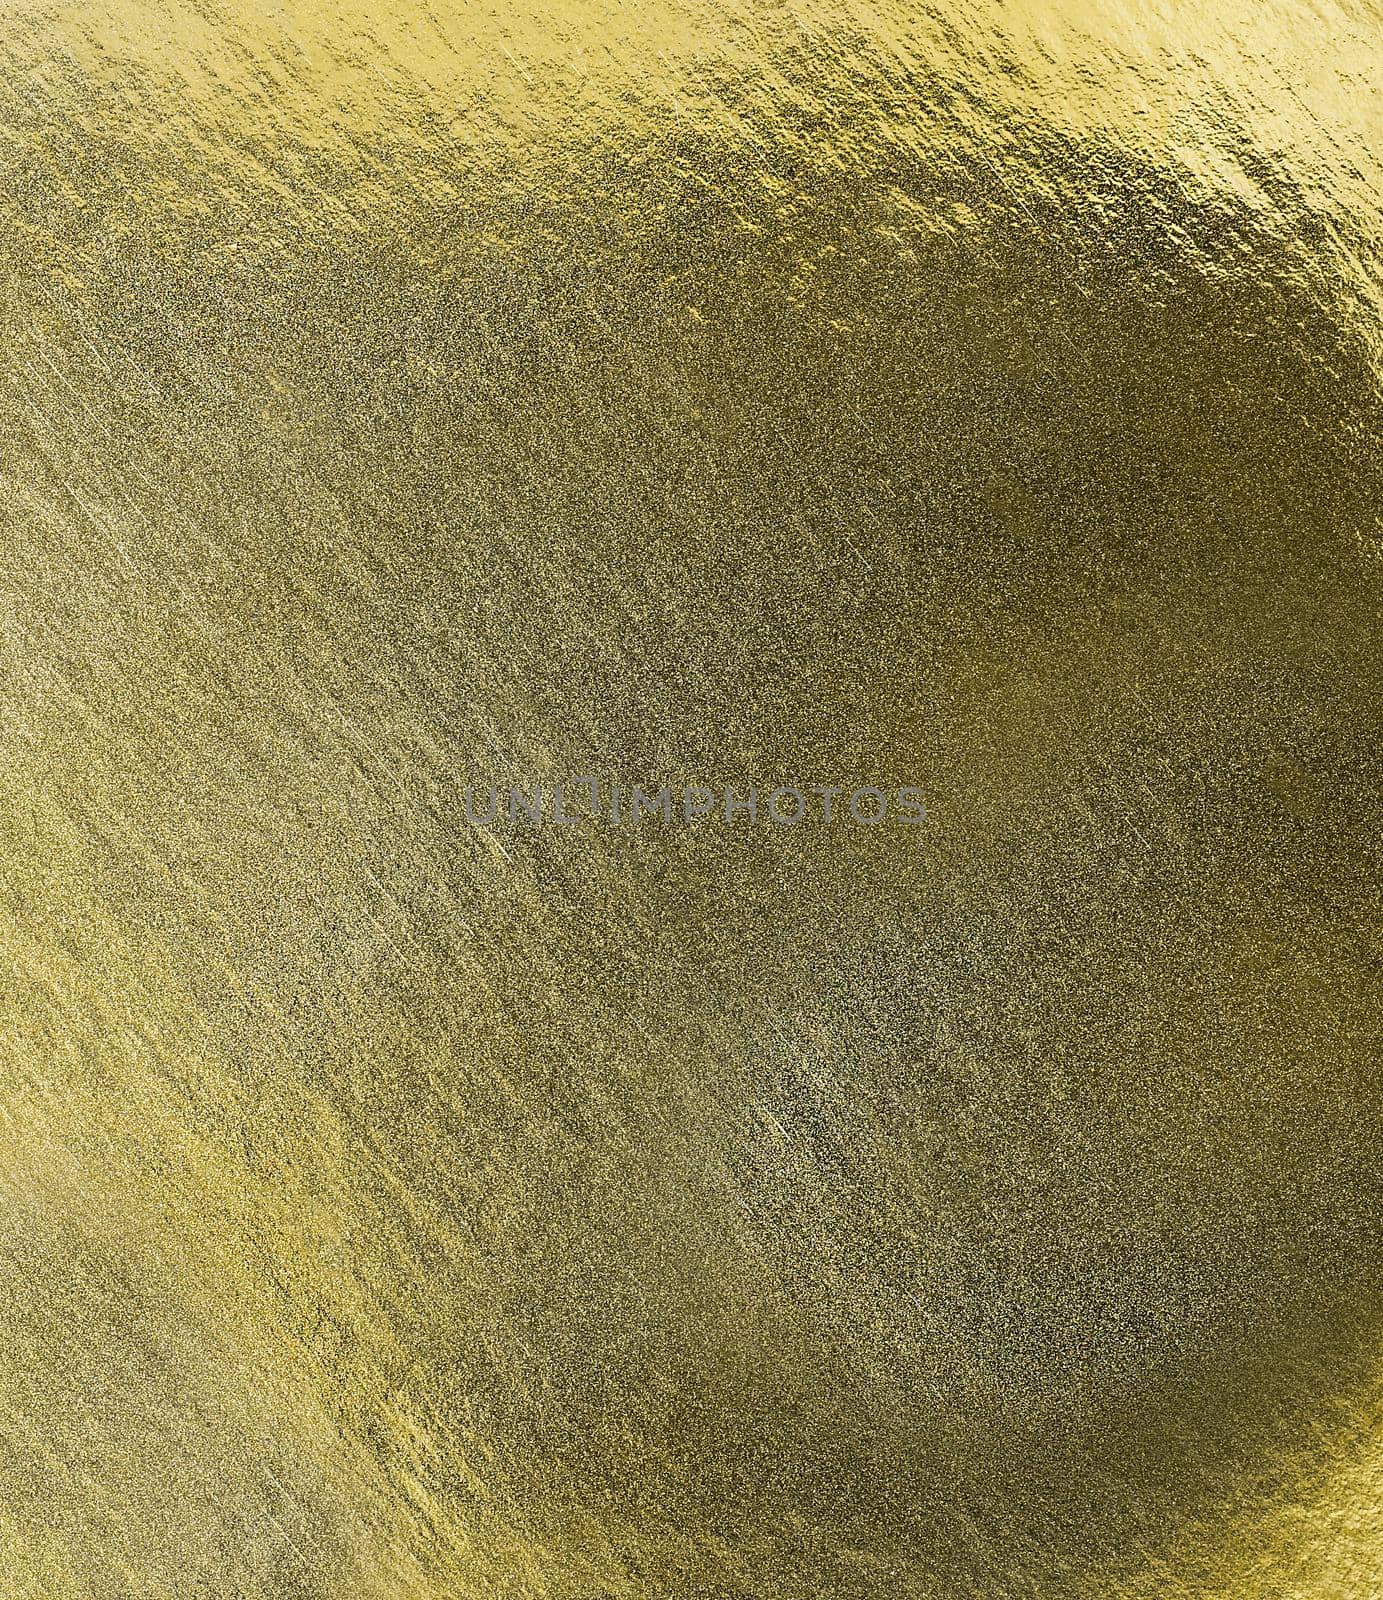 Texture or background.Shiny rough golden surface